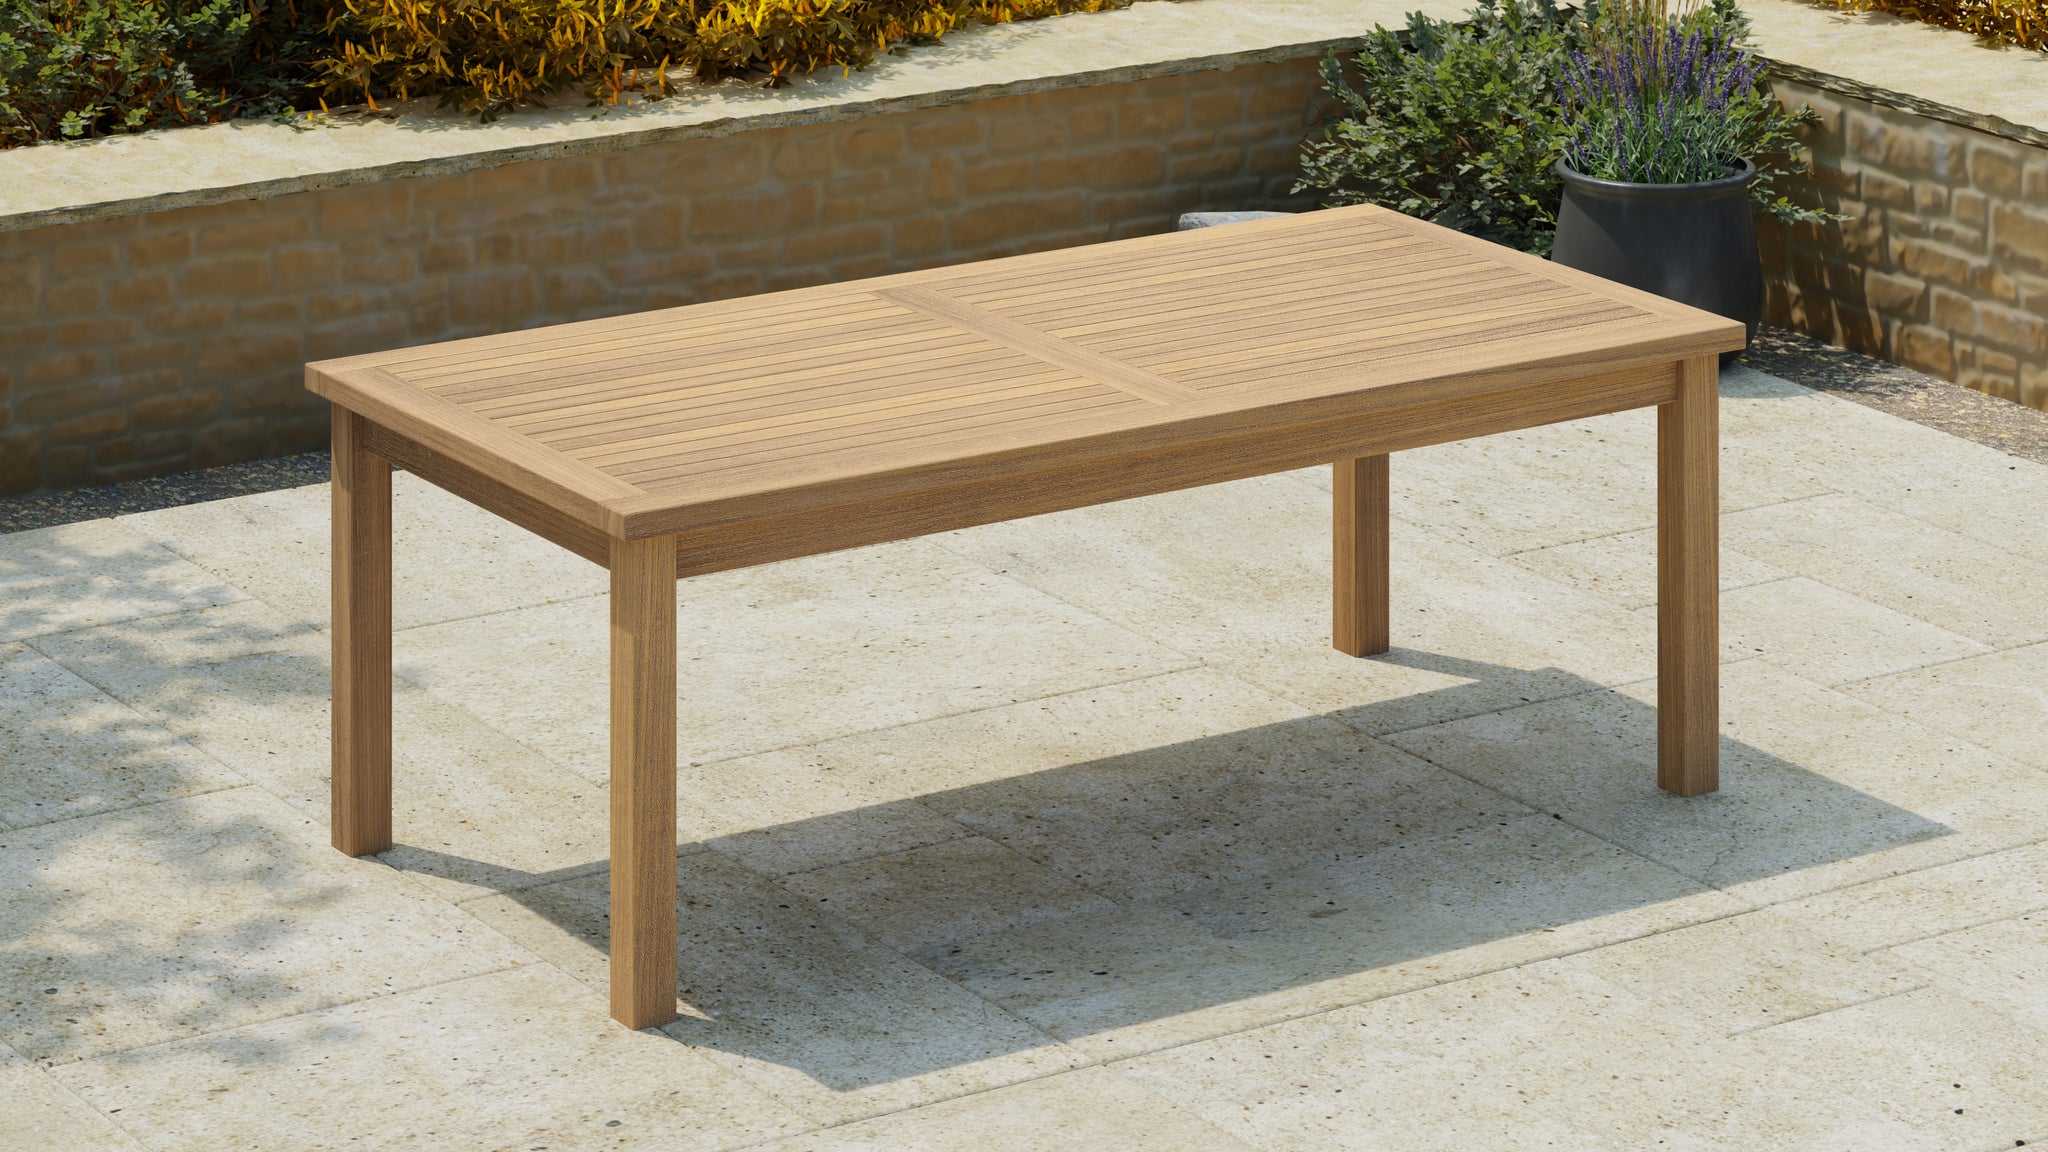 100x200cm Fixed Rectangular Table without Parasol Hole